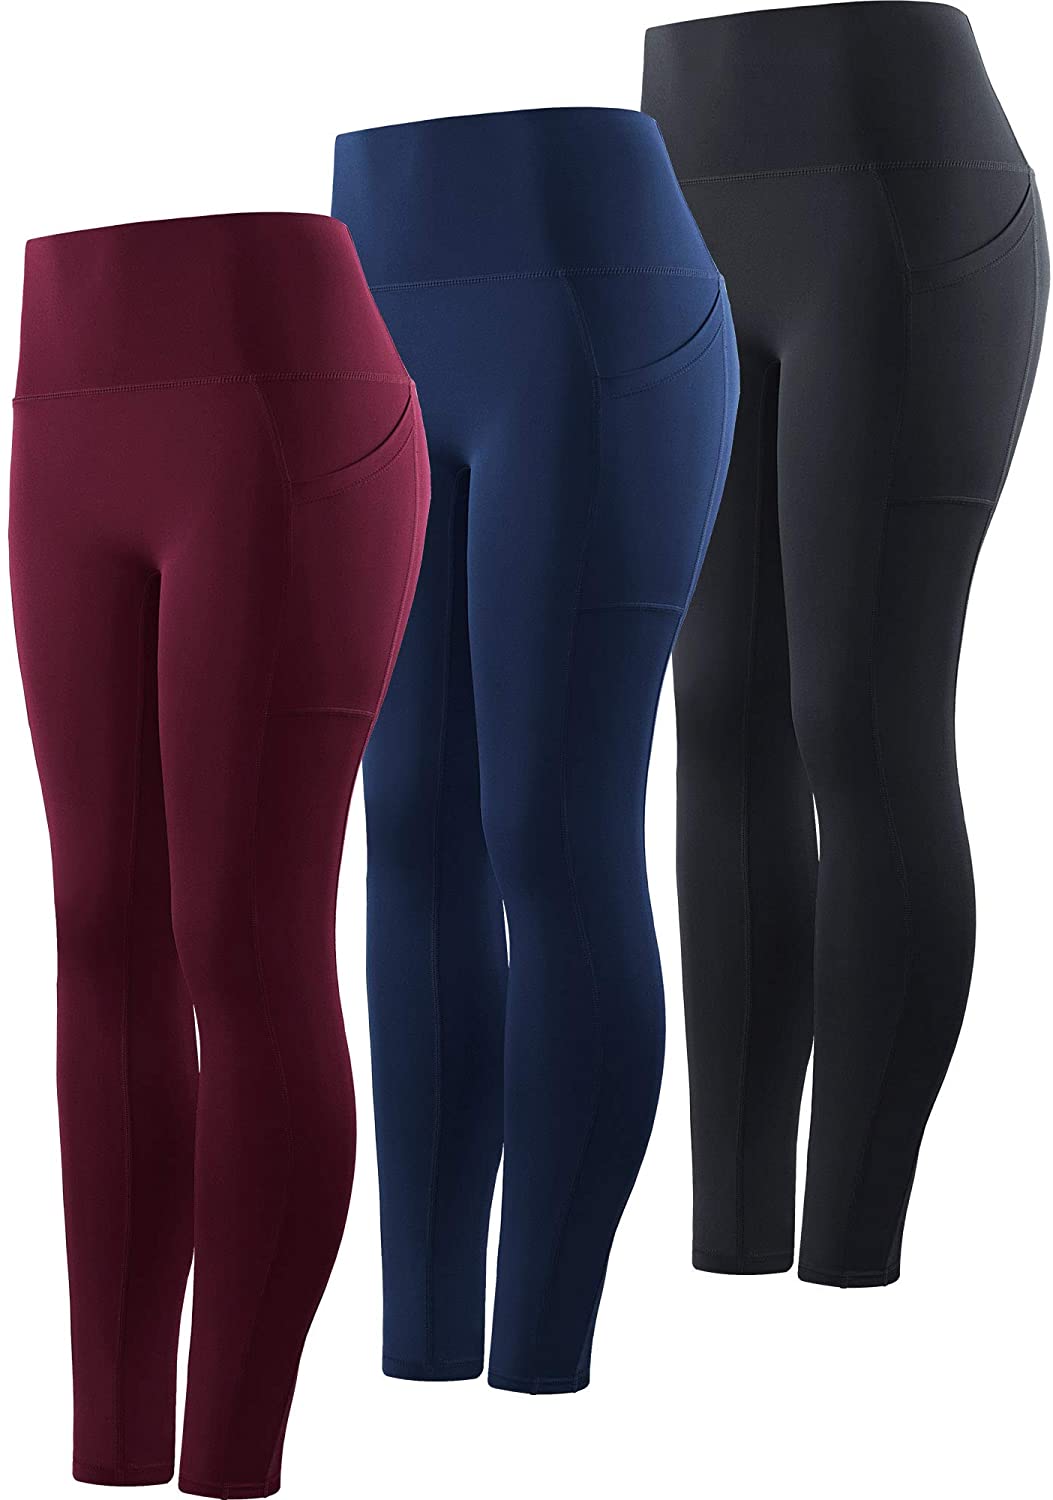 CADMUS Yoga Pant for Women High Waisted Tummy Control Workout Leggings with Pockets 